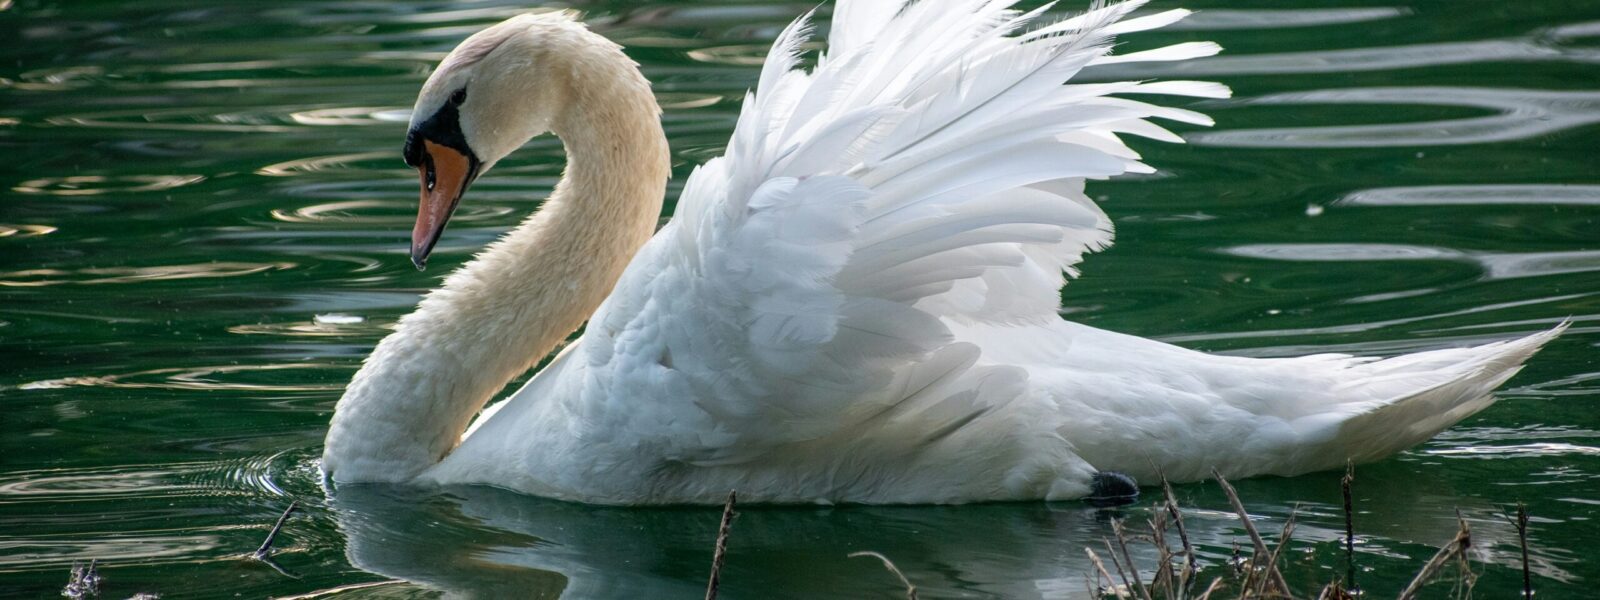 Fishing tackle is killing swans, county says